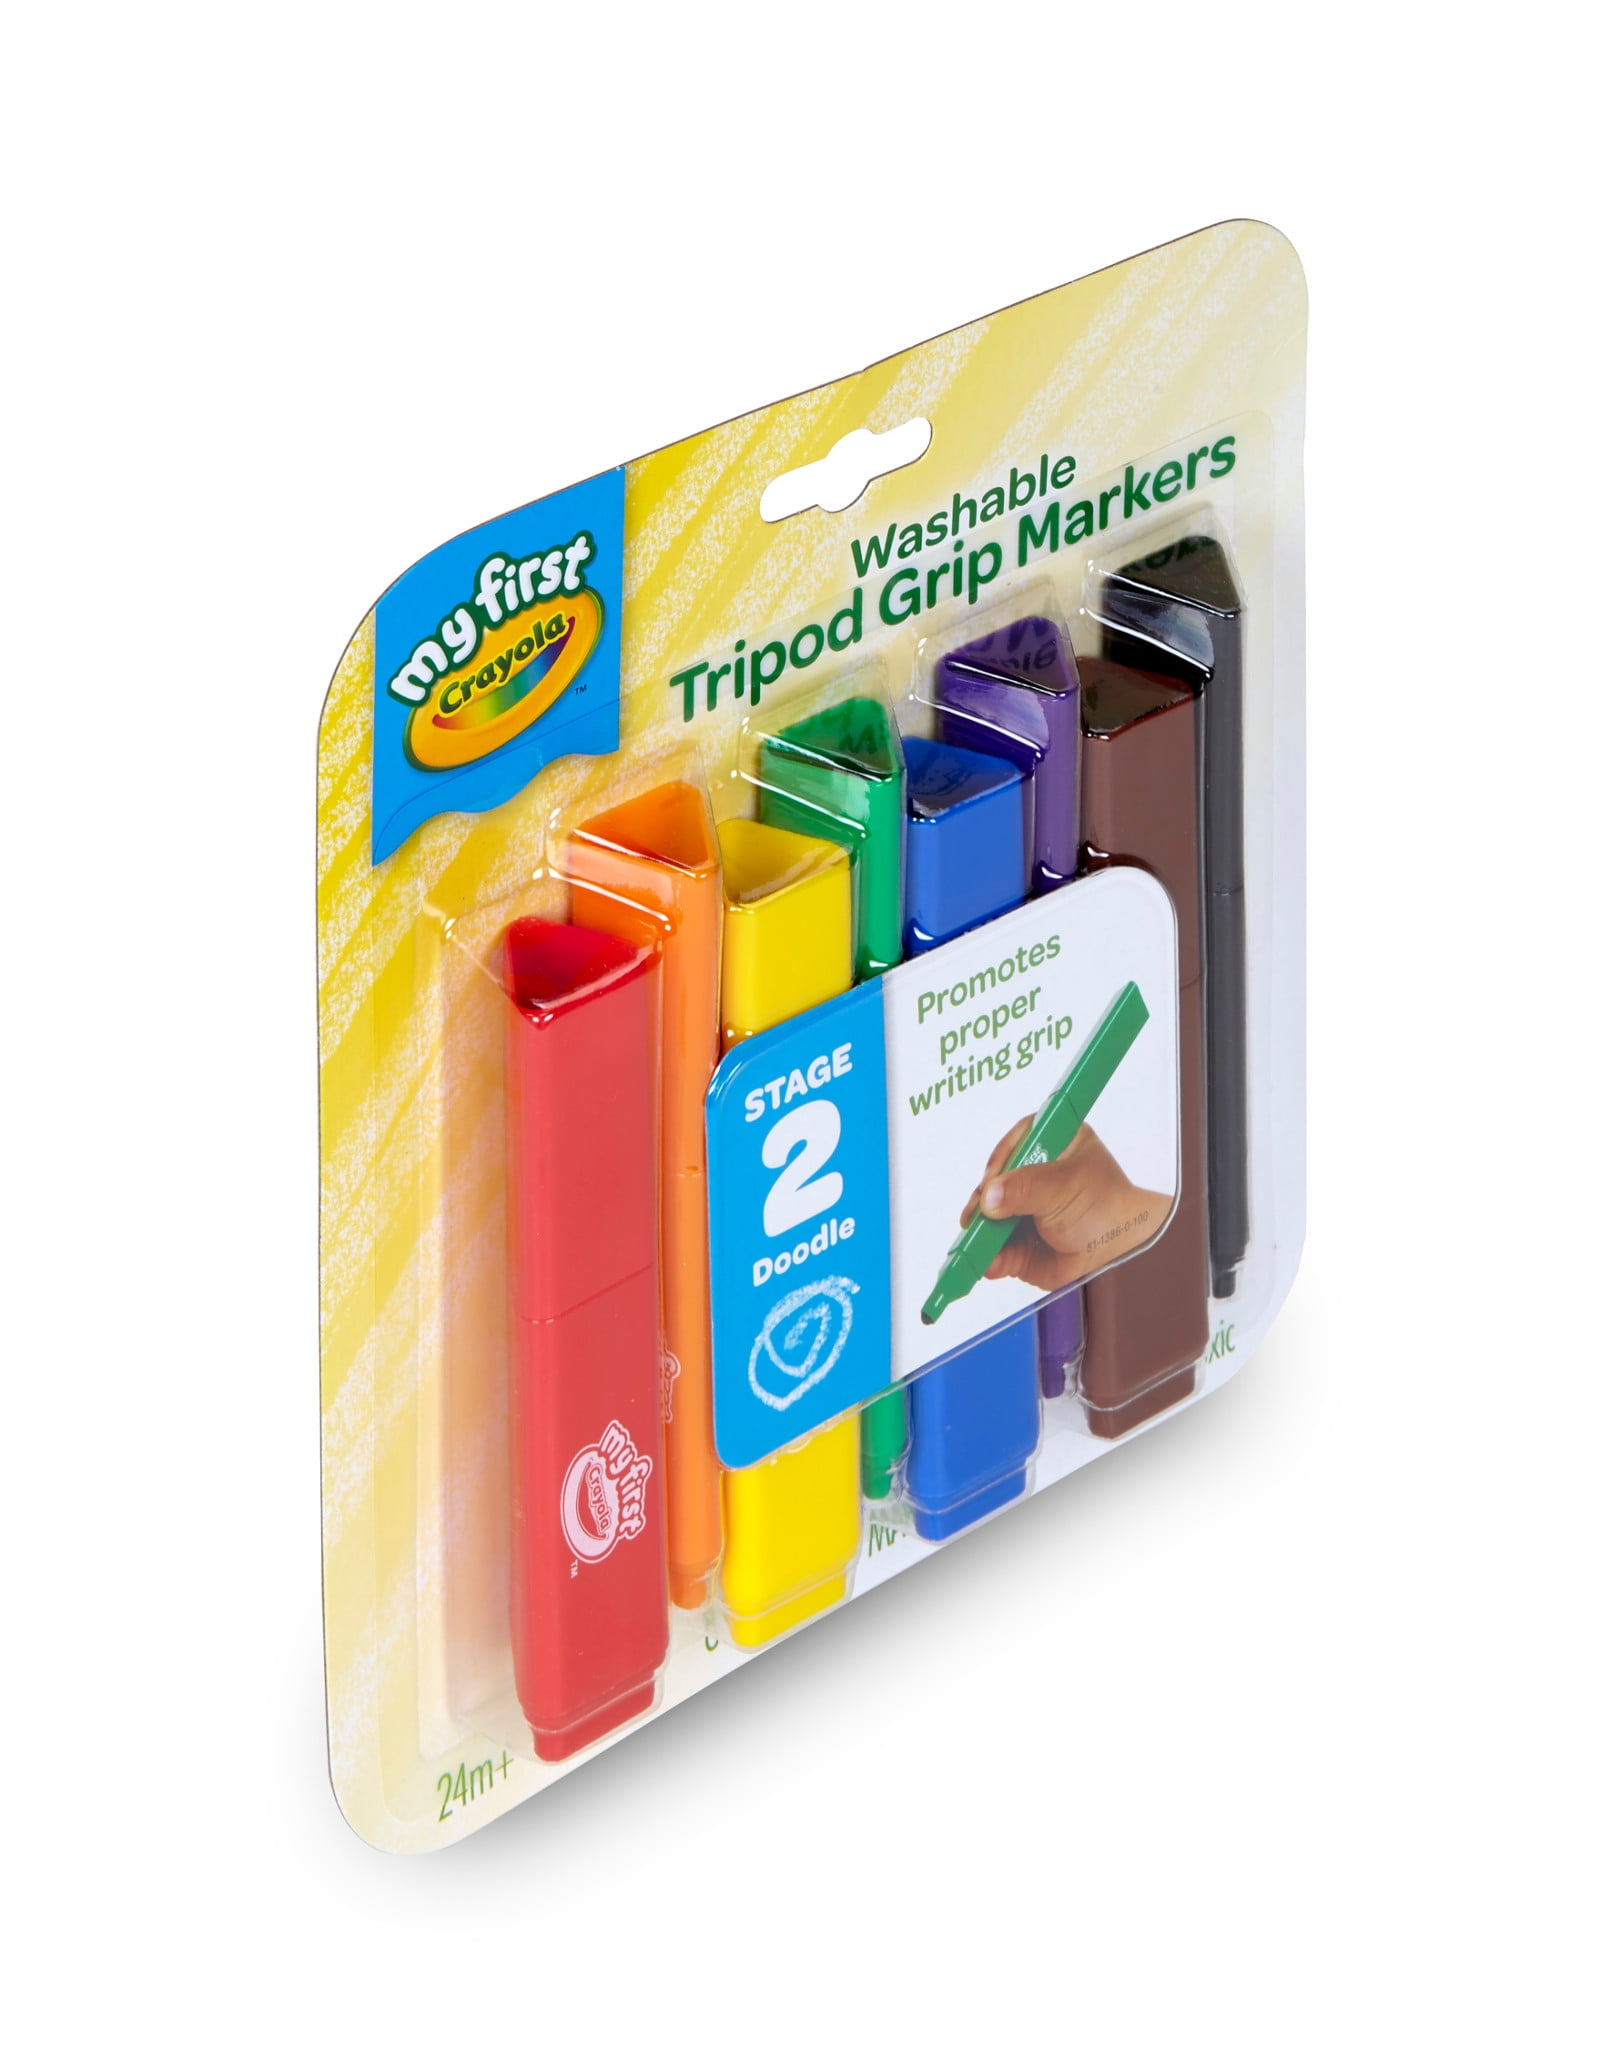 4 Kids Easter Basket Stuffers Stocking Stuffers Crayola My First Wash Tripod Grip Markers Washable Holiday Gifting Easter Gifting for Girls and Boys Ages 3 Arts and Crafts Gift for Boys and Girls 5,6 and Up 